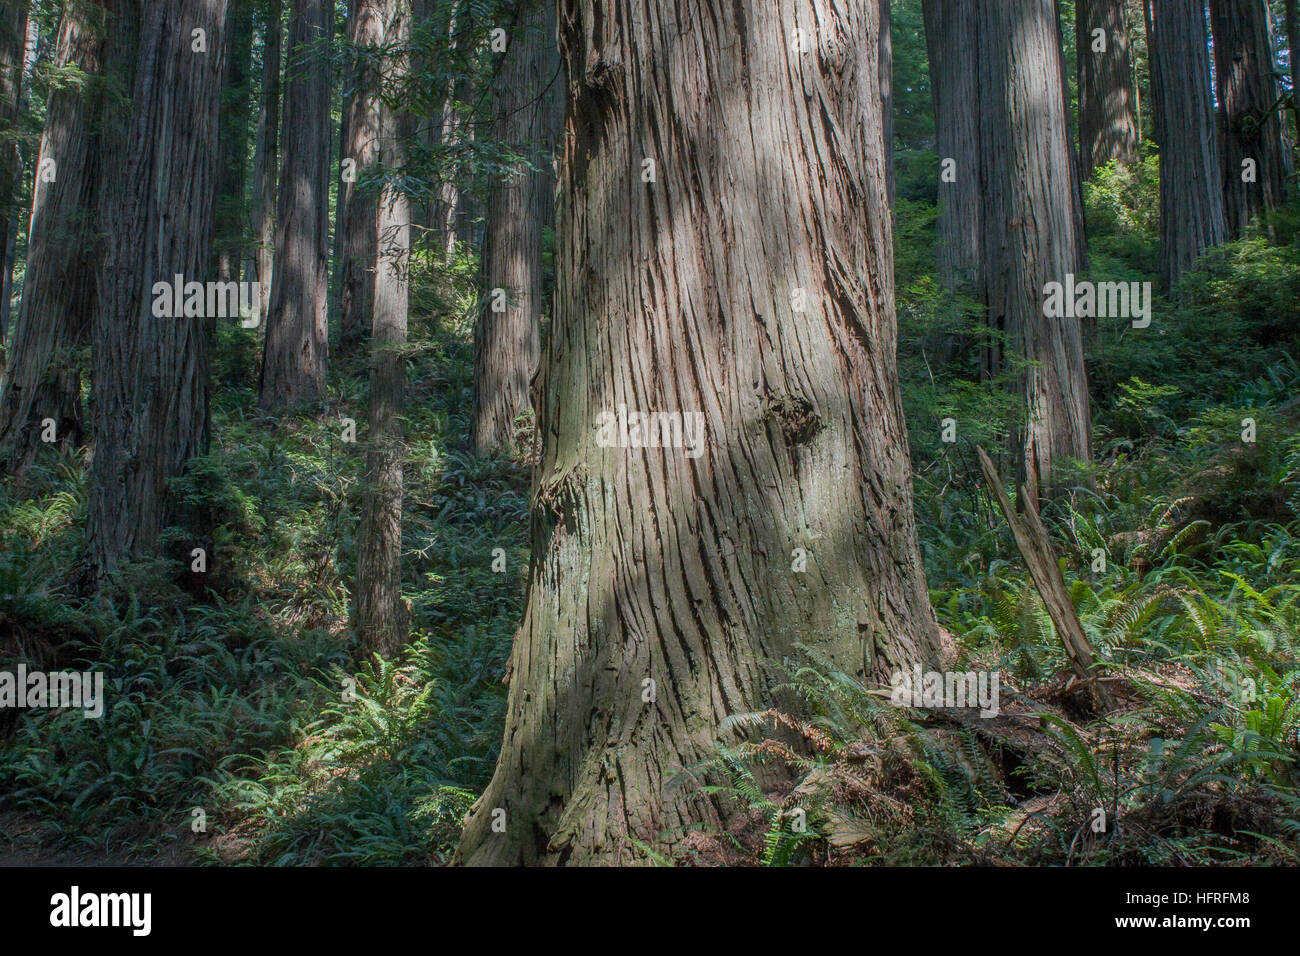 Immense old-growth California Redwoods in Redwood National Park, California, USA. Stock Photo